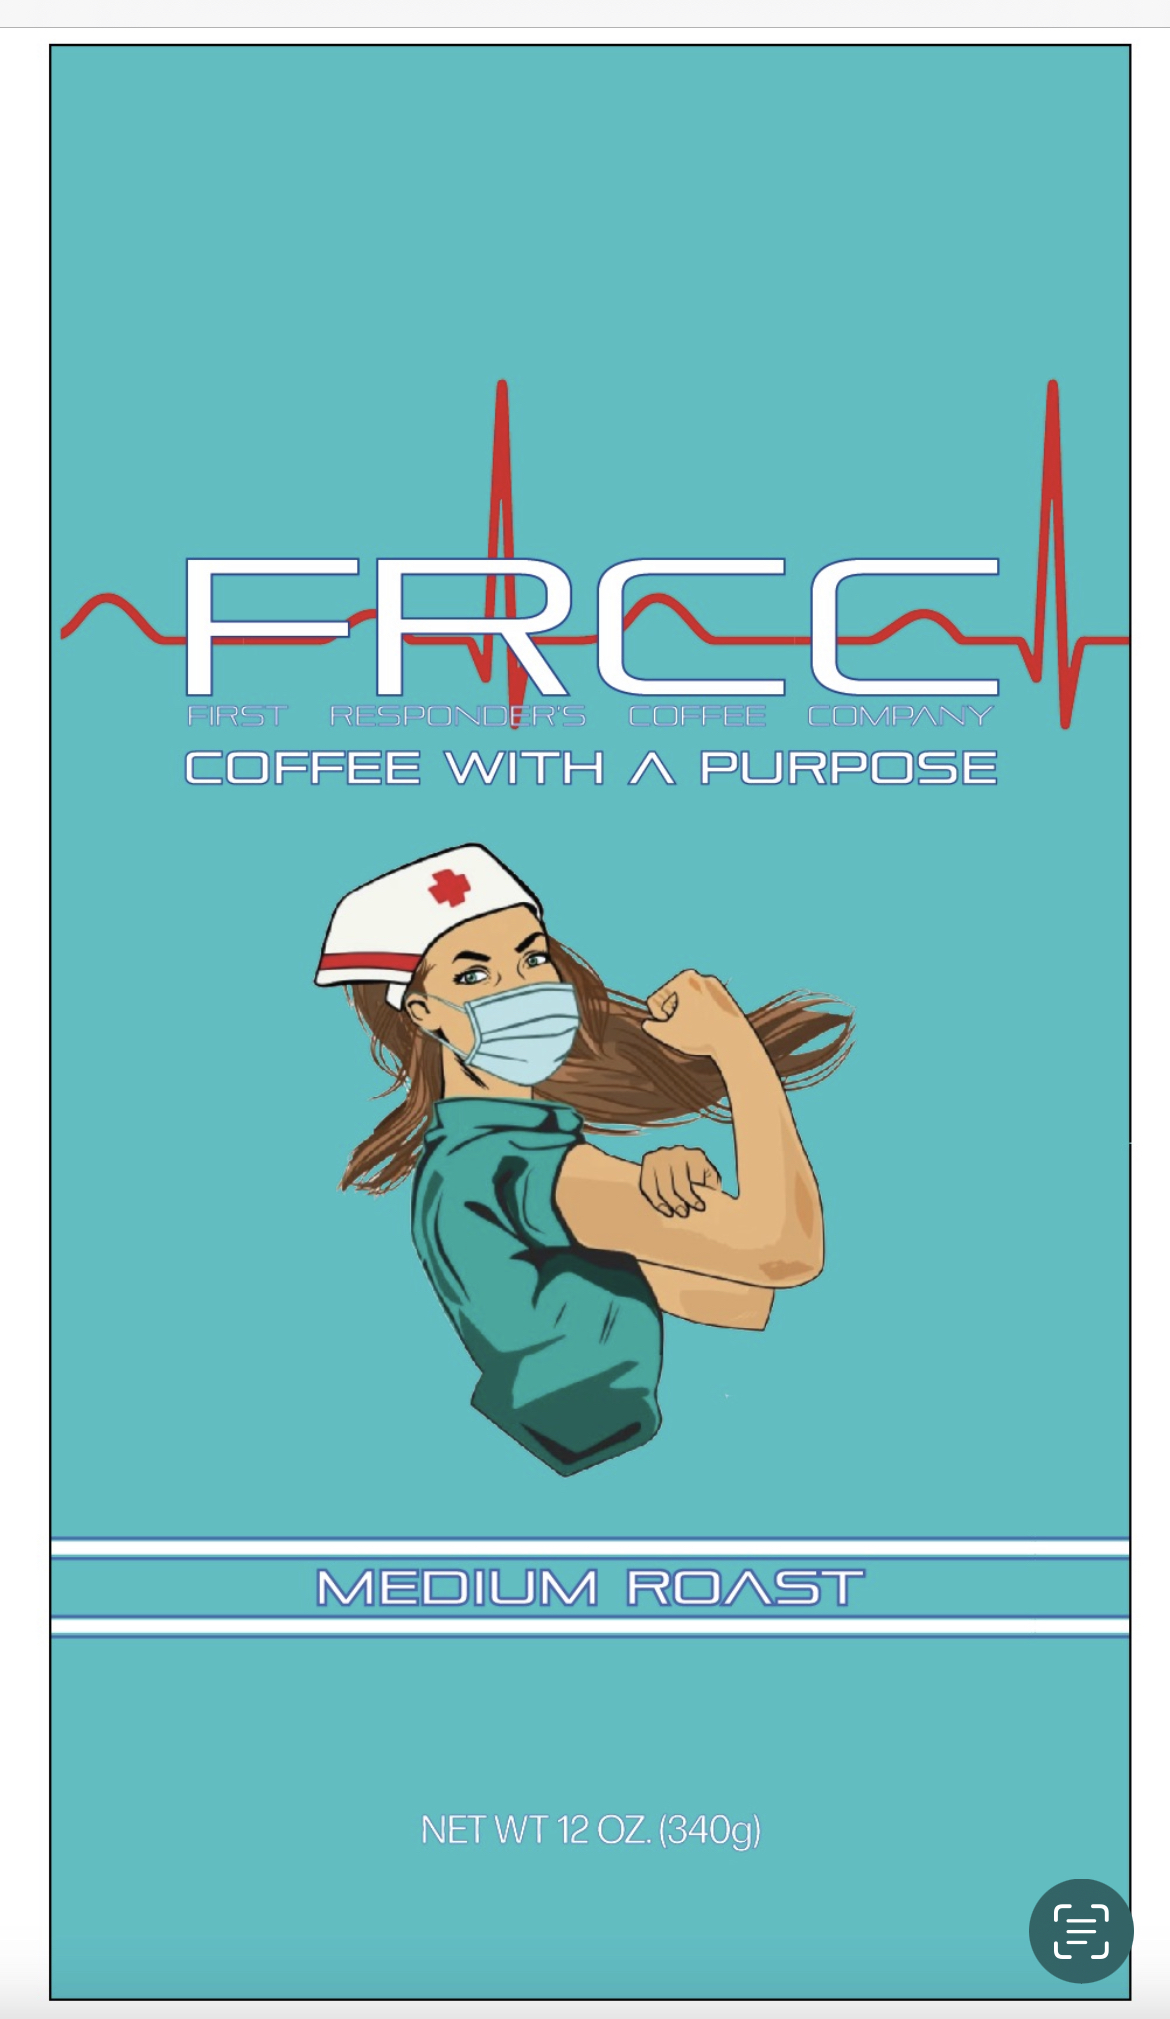 First Responder’s Coffee Company Launches New Coffee Bag to Raise Funds for The American Nurses Foundation